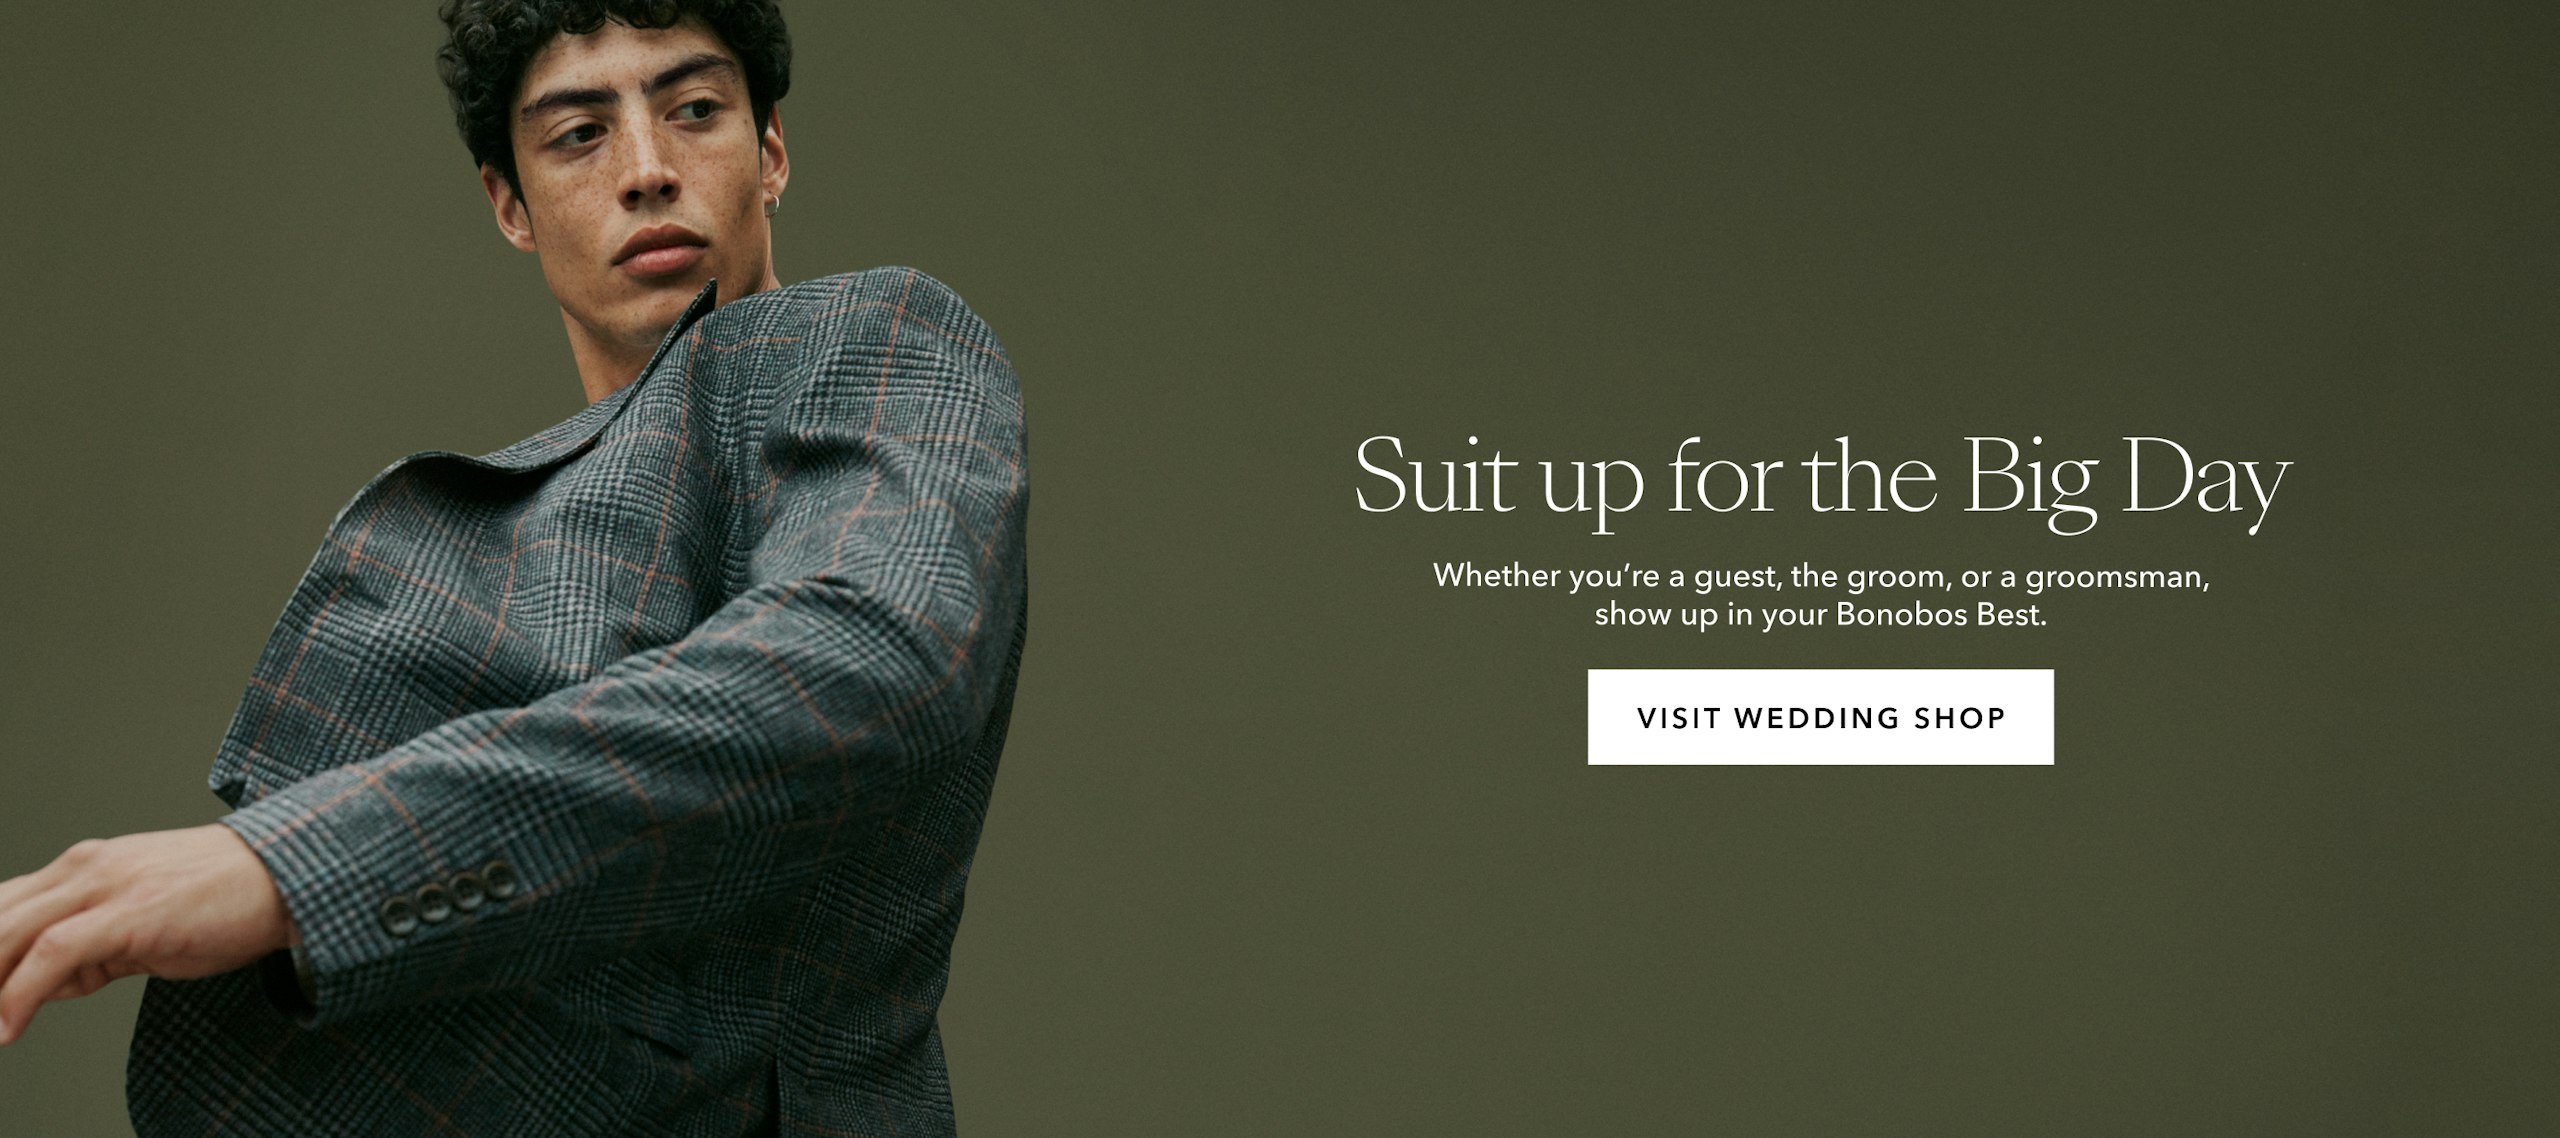 Man in suit, text reads: Suit up for the Big Day Whether you’re a guest, the groom, or a groomsman, show up in your Bonobos Best. VISIT WEDDING SHOP